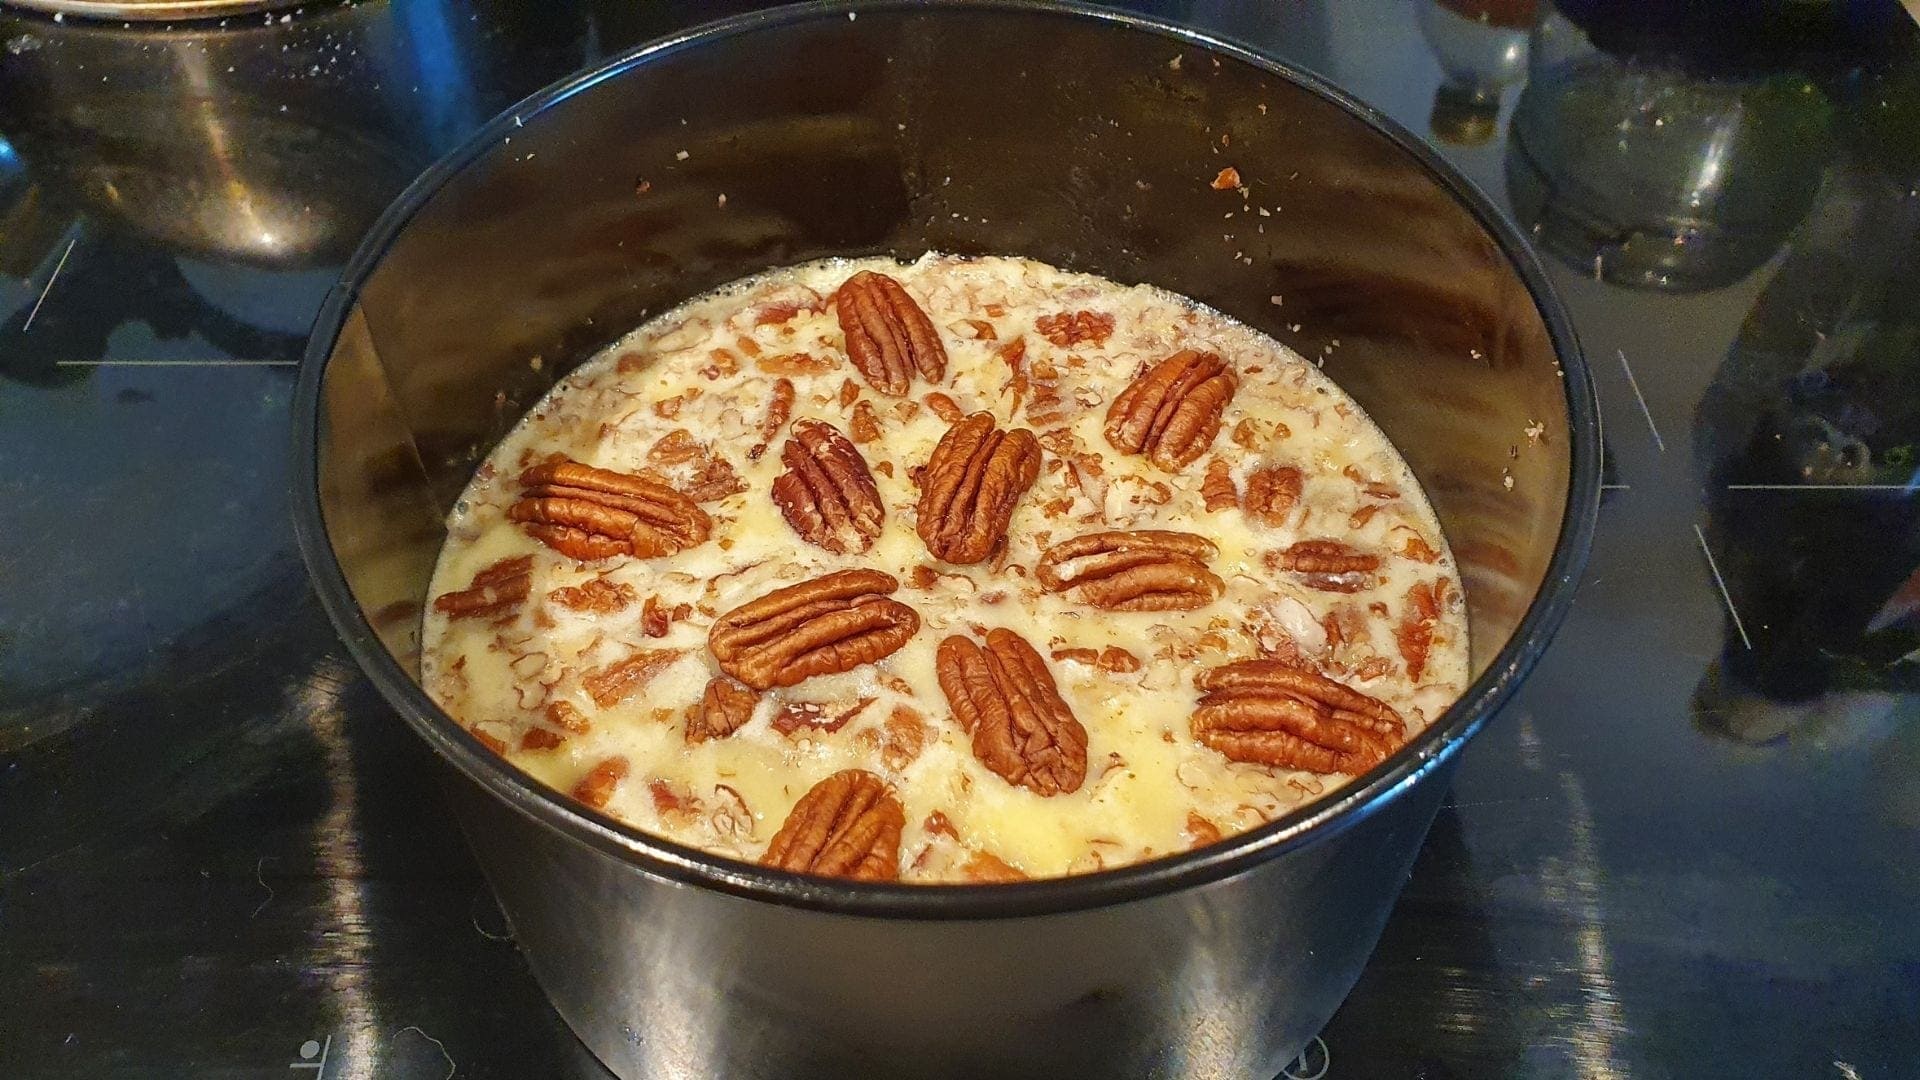 Adding chopped pecans and pecan topping